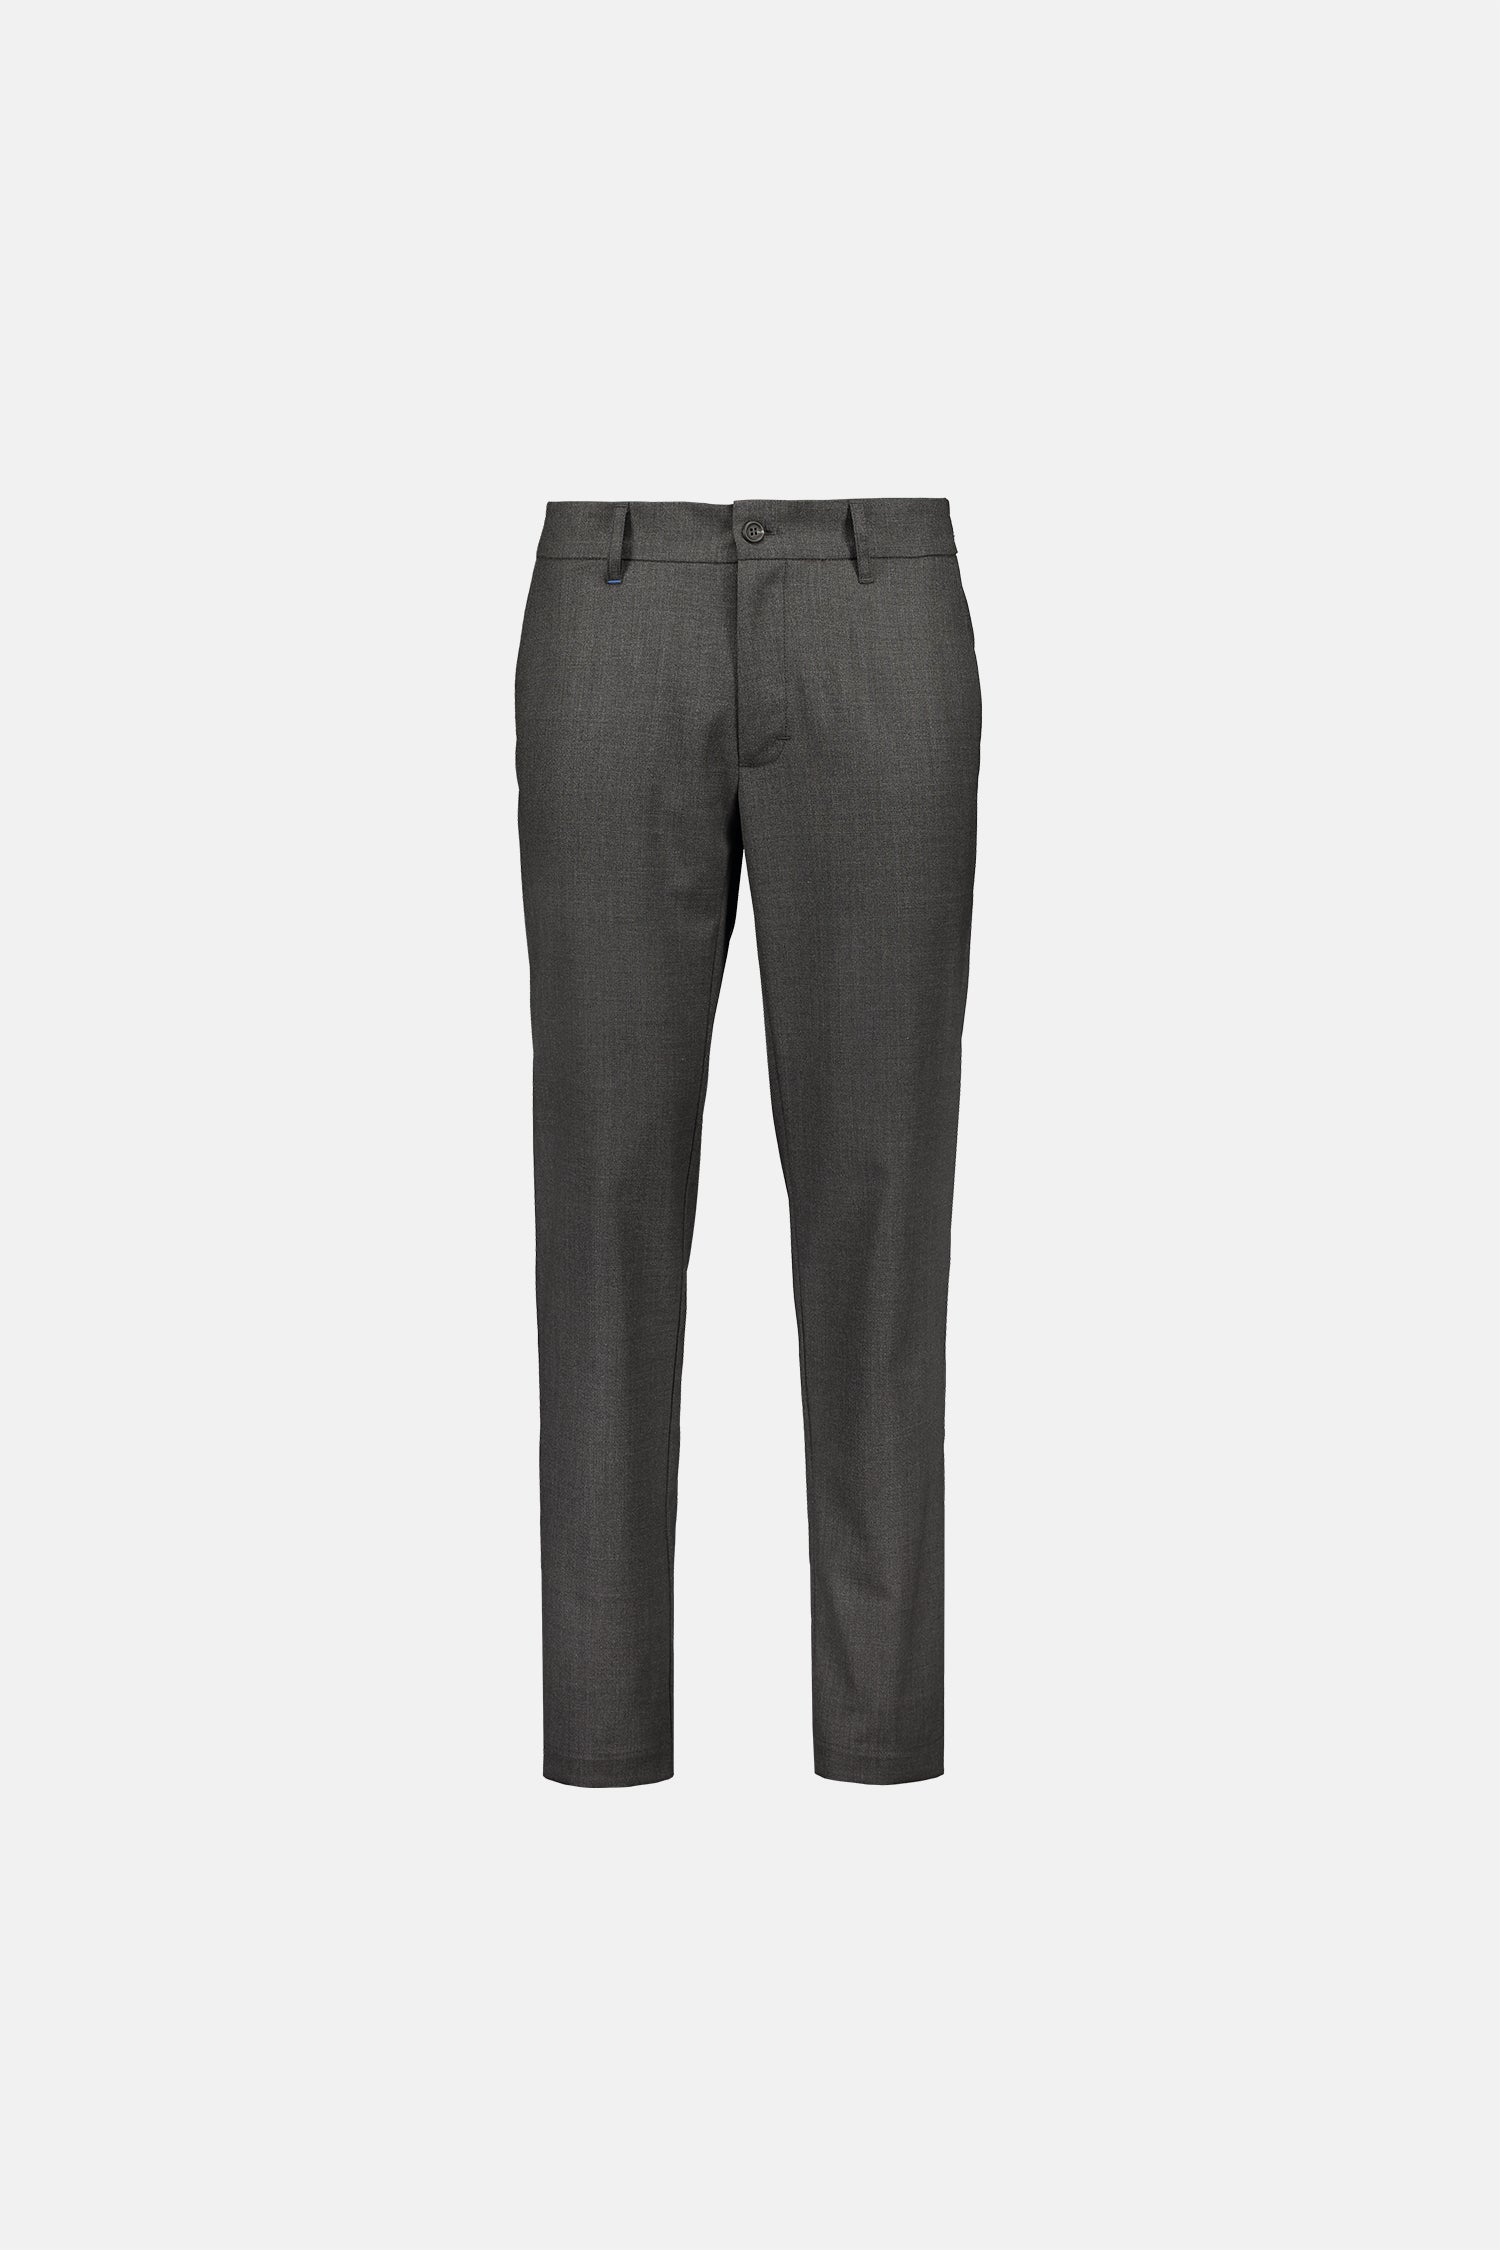 Frenn Seppo comfortable premium quality sustainable wool trousers grey